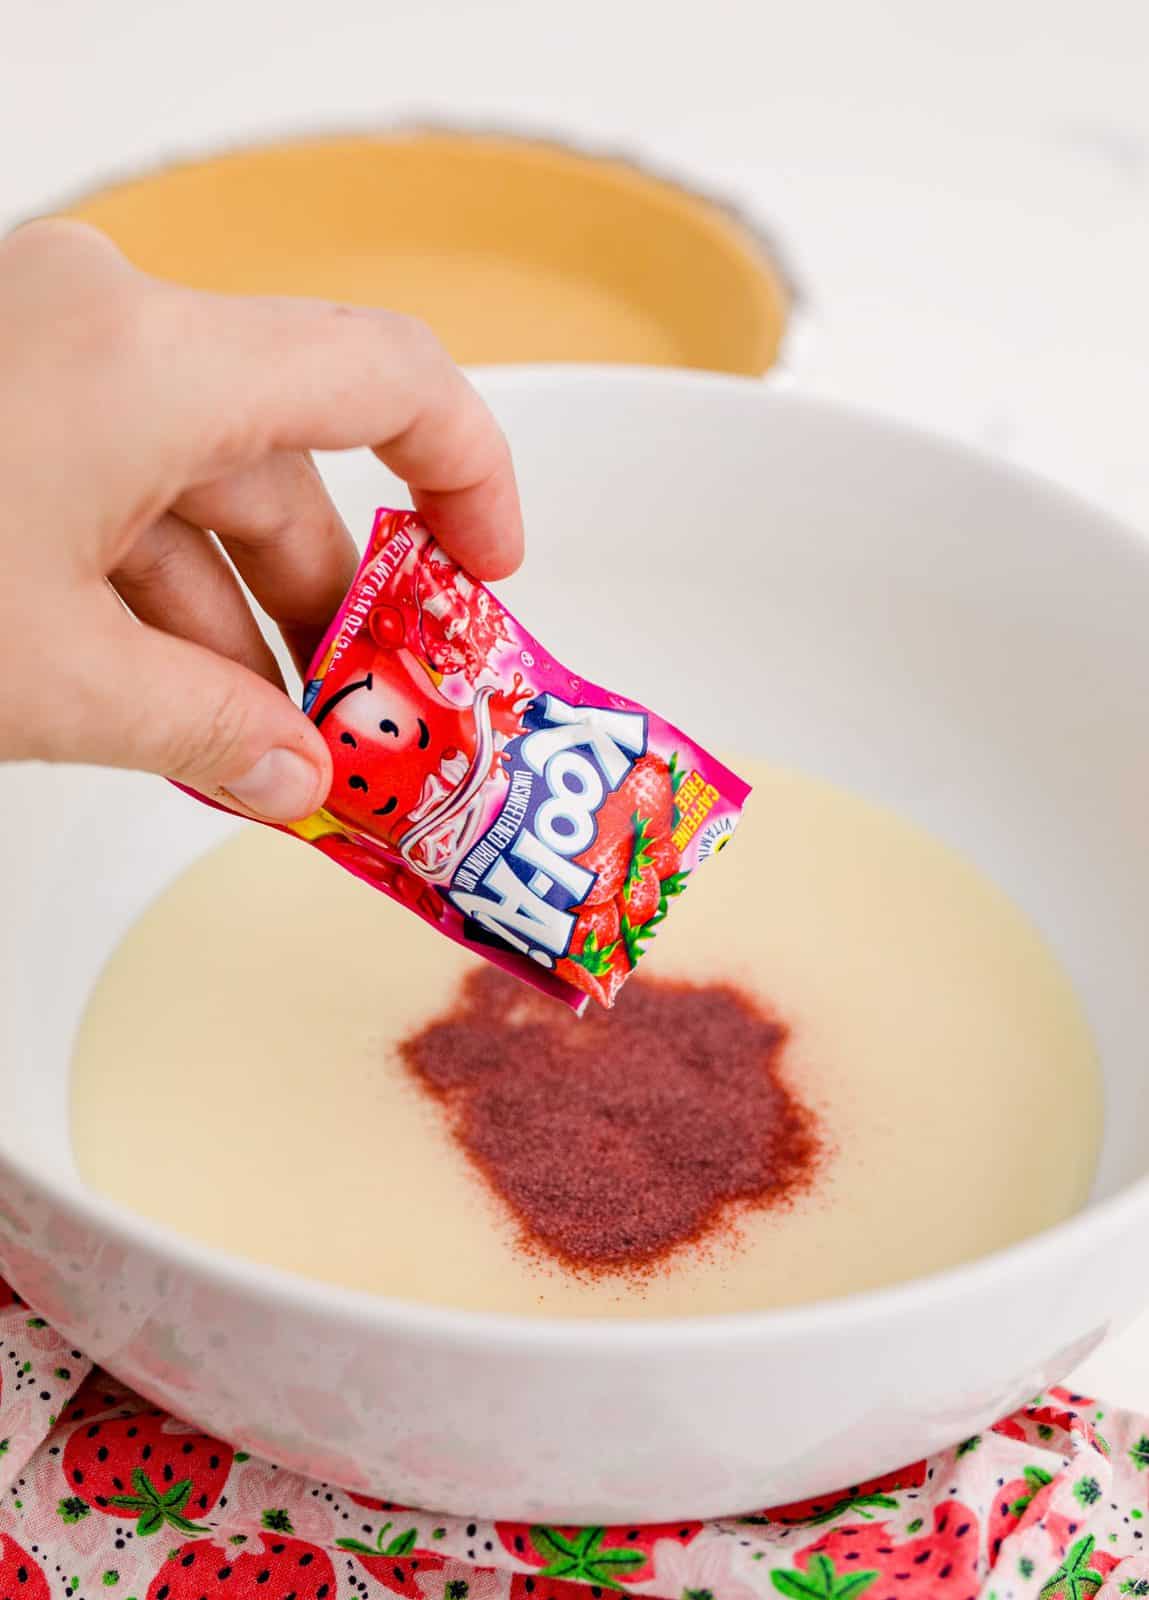 Kool-Aid being sprinkled into the bowl with sweetened condensed milk.